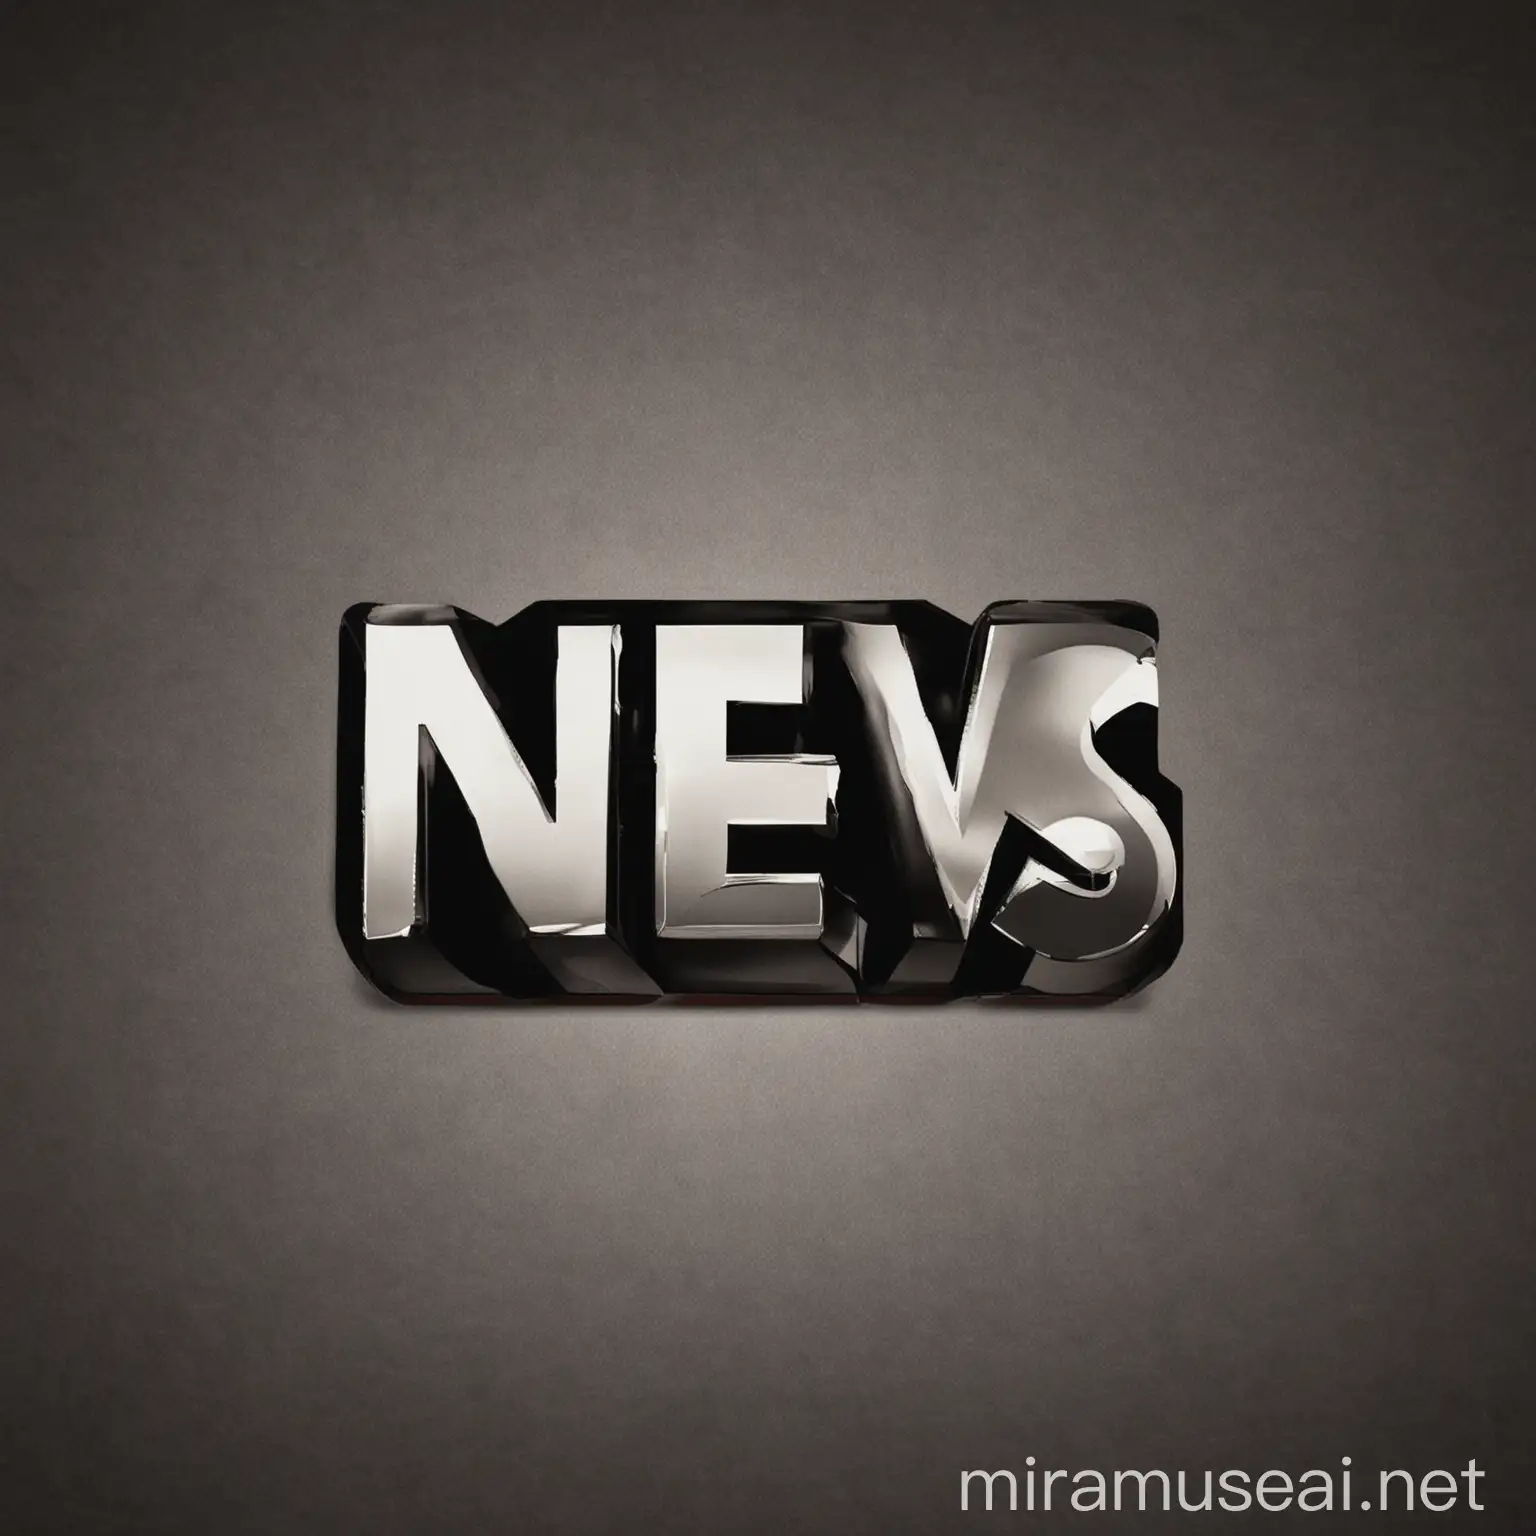 Channel Name: News_Use

make the logo for channel in name " News_Use"  with creative way like moredn tupe 